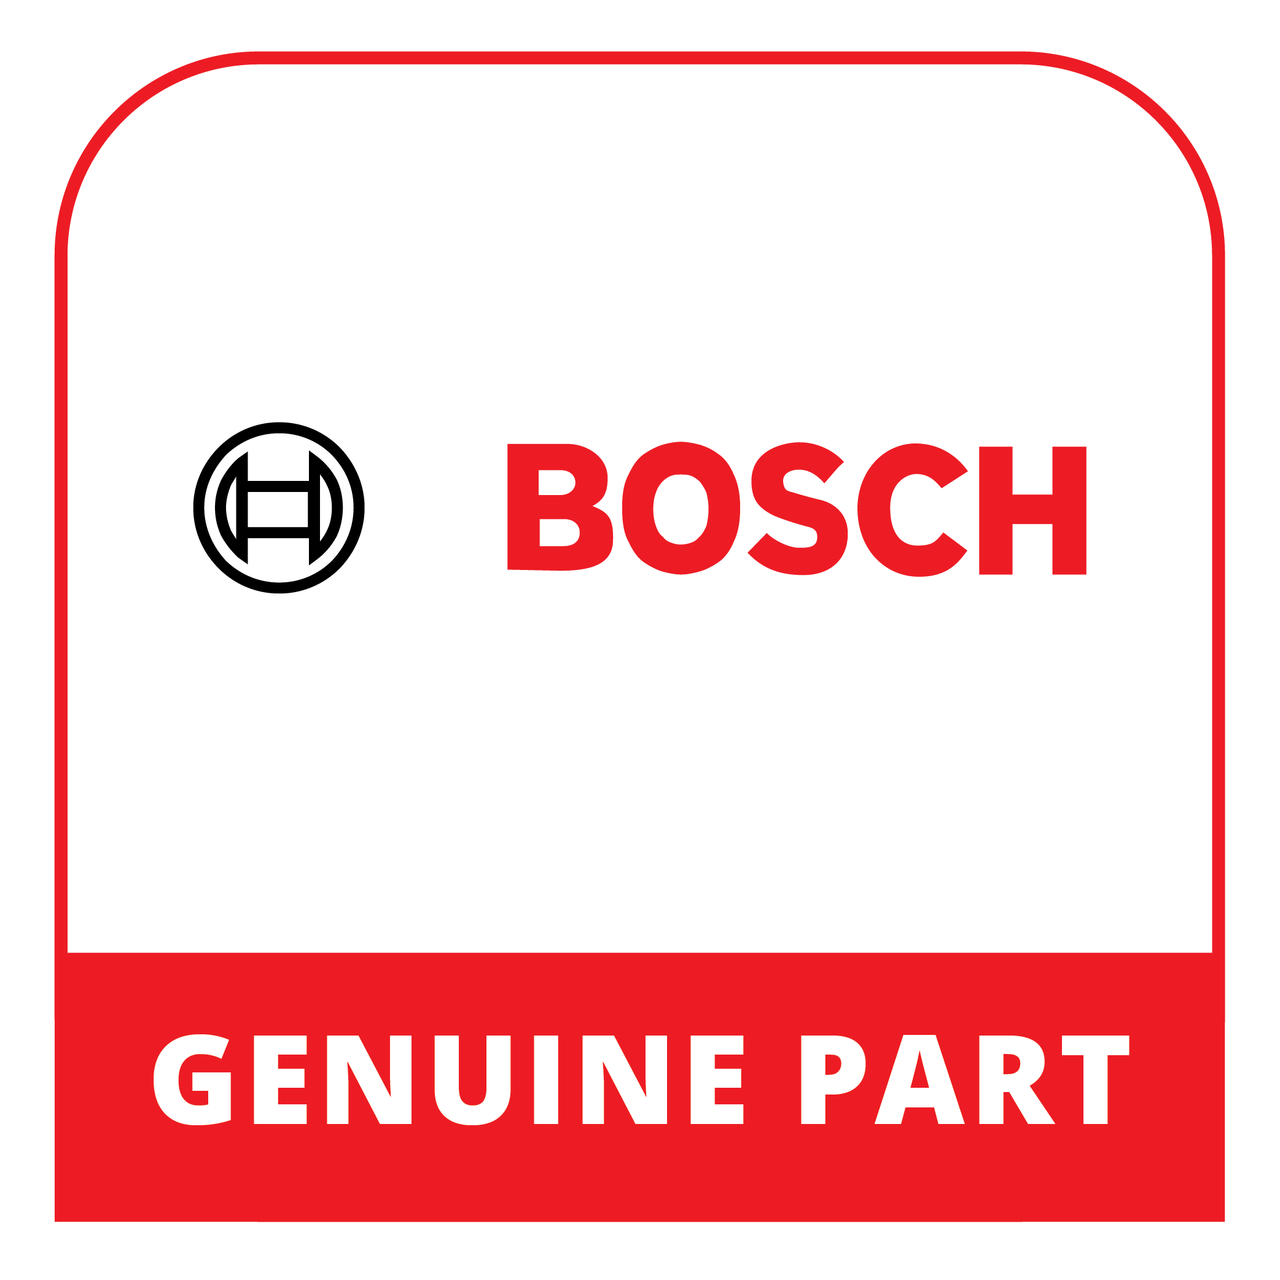 Bosch (Thermador) 12033377 - Control Module Programmed - Genuine Bosch (Thermador) Part